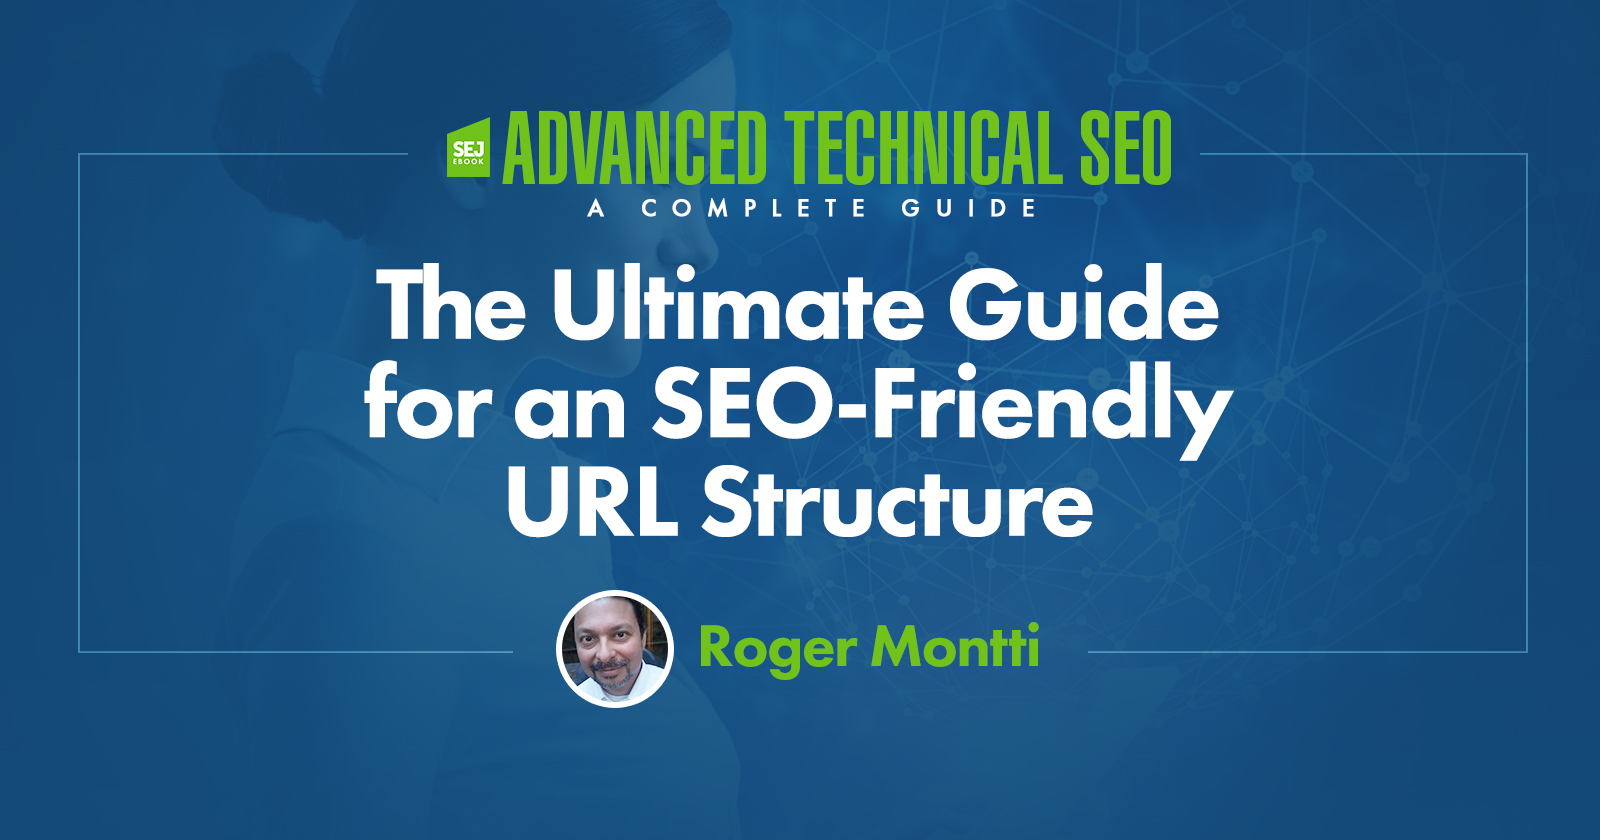 The Ultimate Guide to SEO-Friendly URL Structure